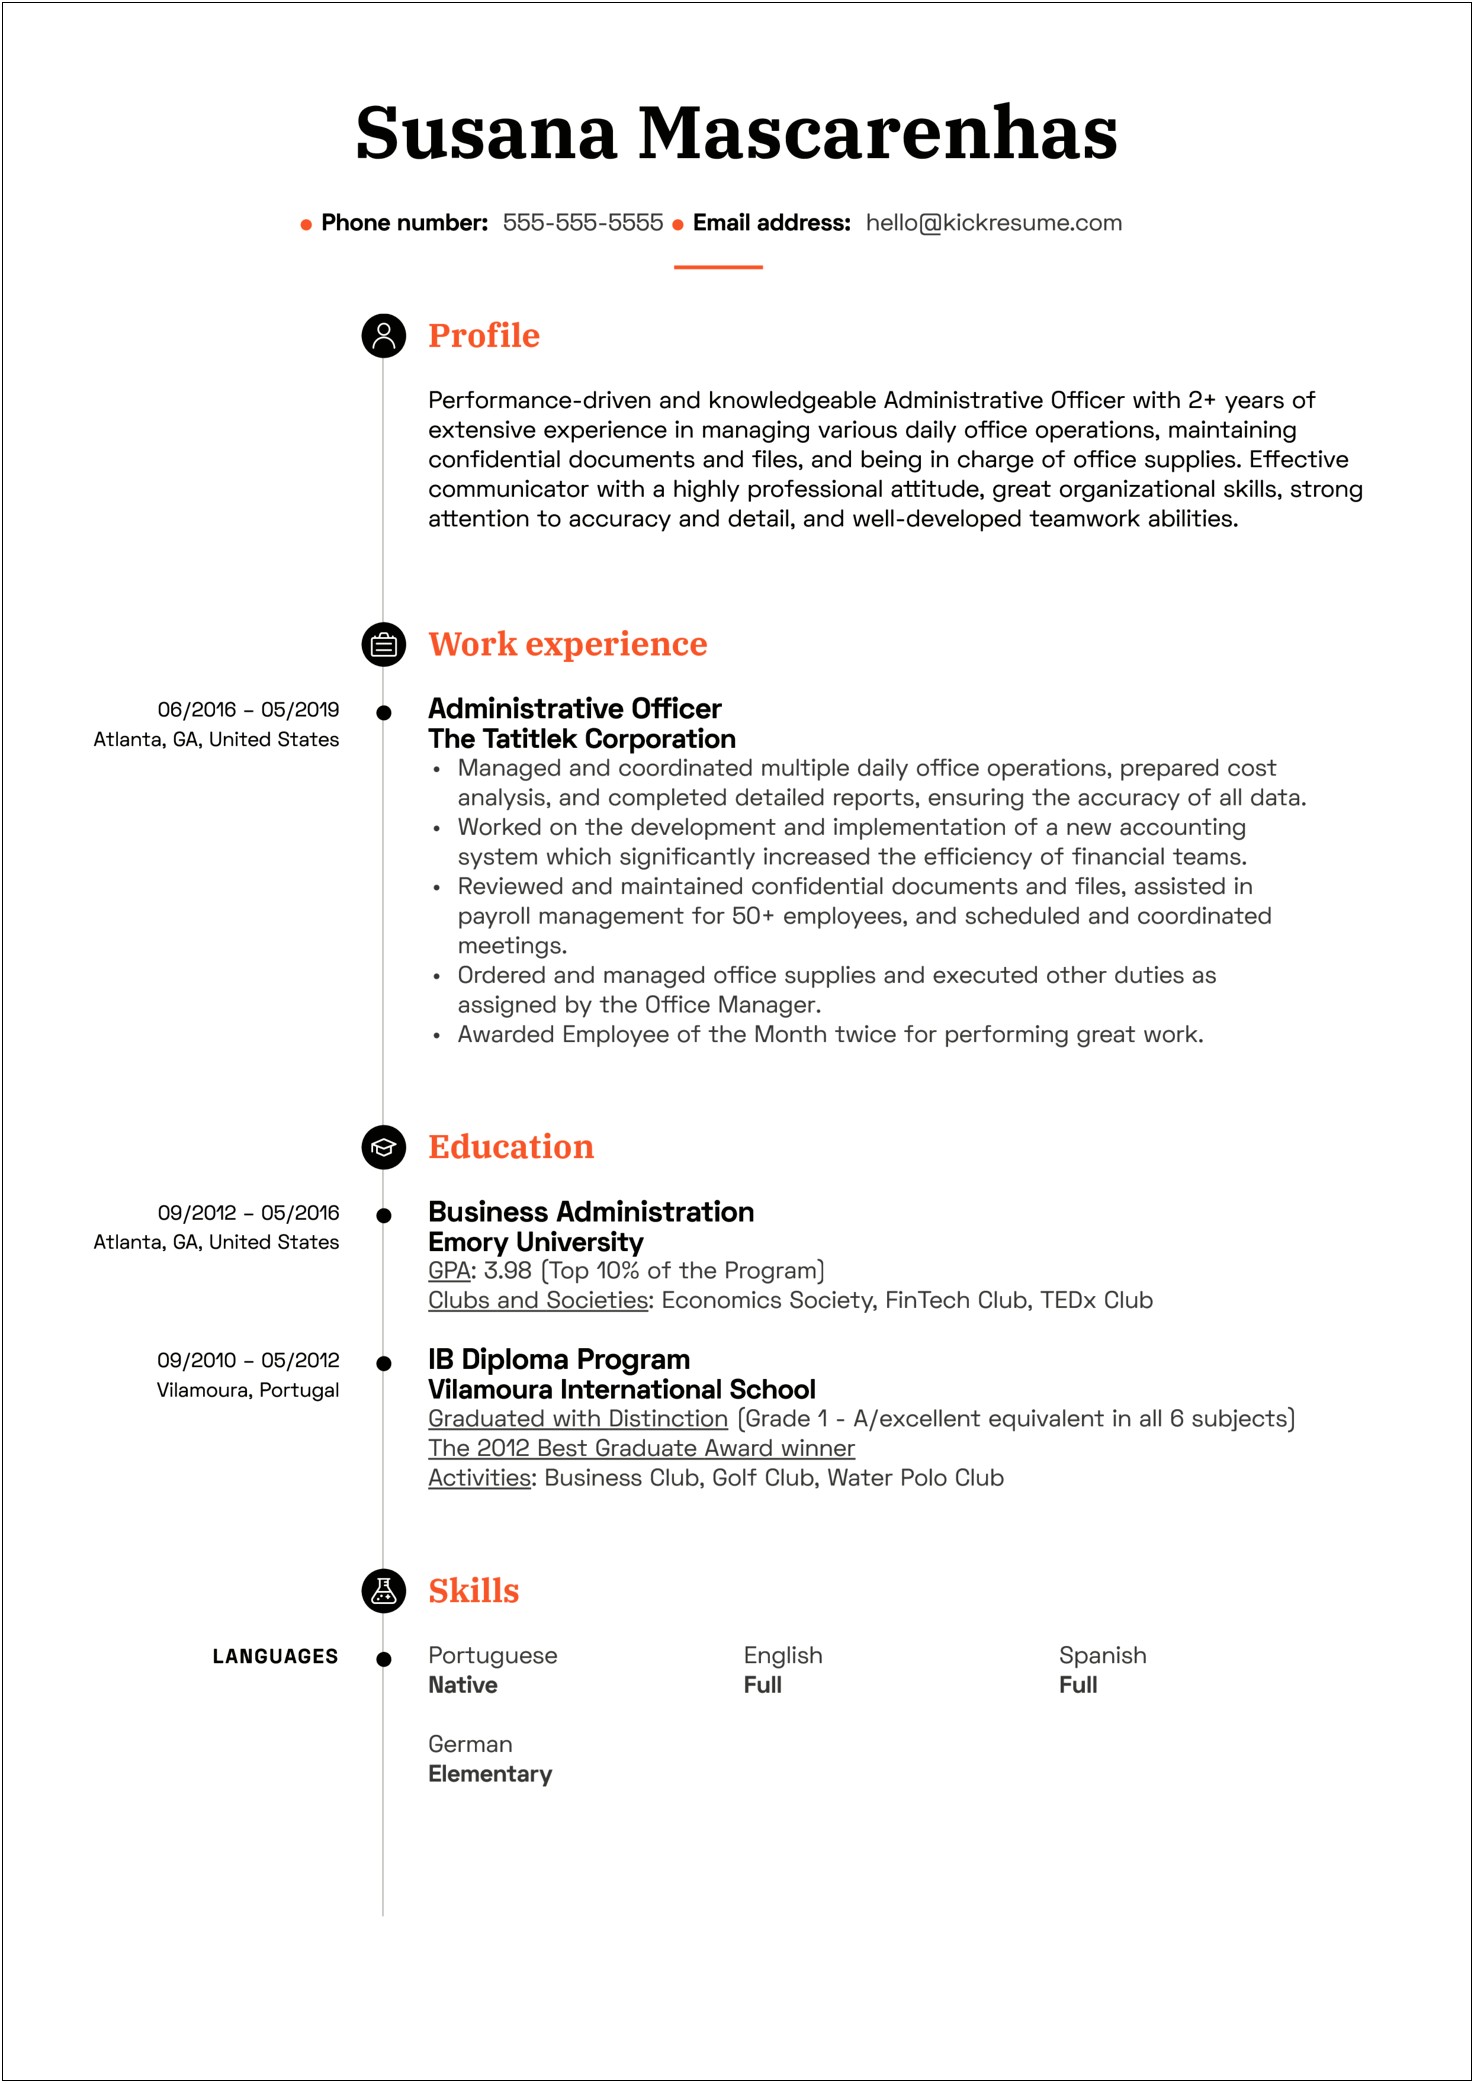 Resume For Business Administration Jobs